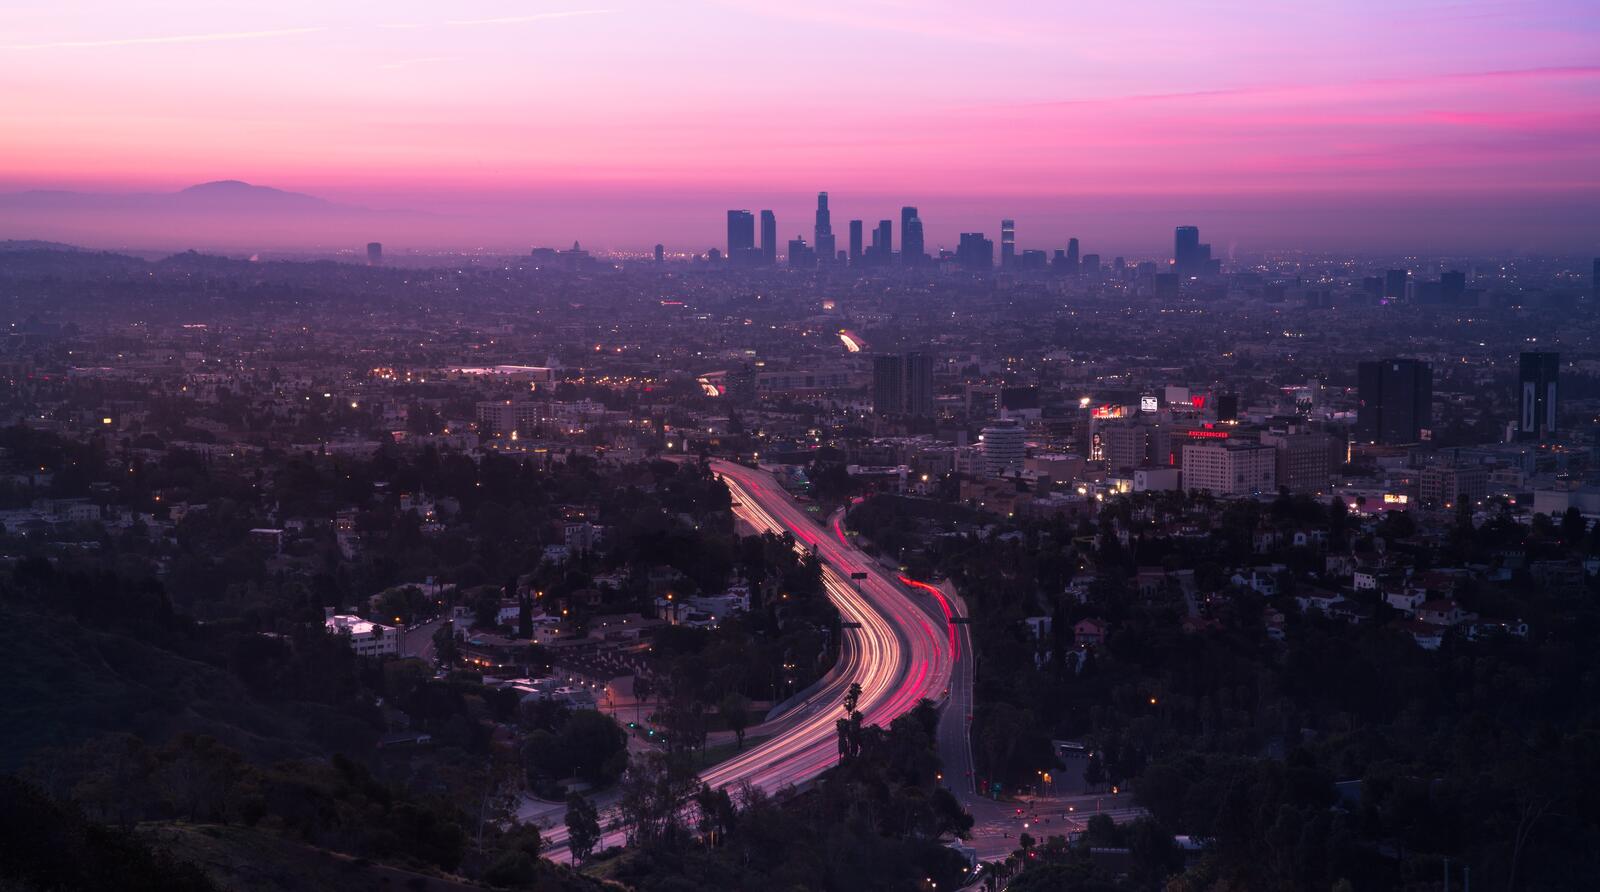 Wallpapers wallpaper united states Los Angeles cityscape on the desktop